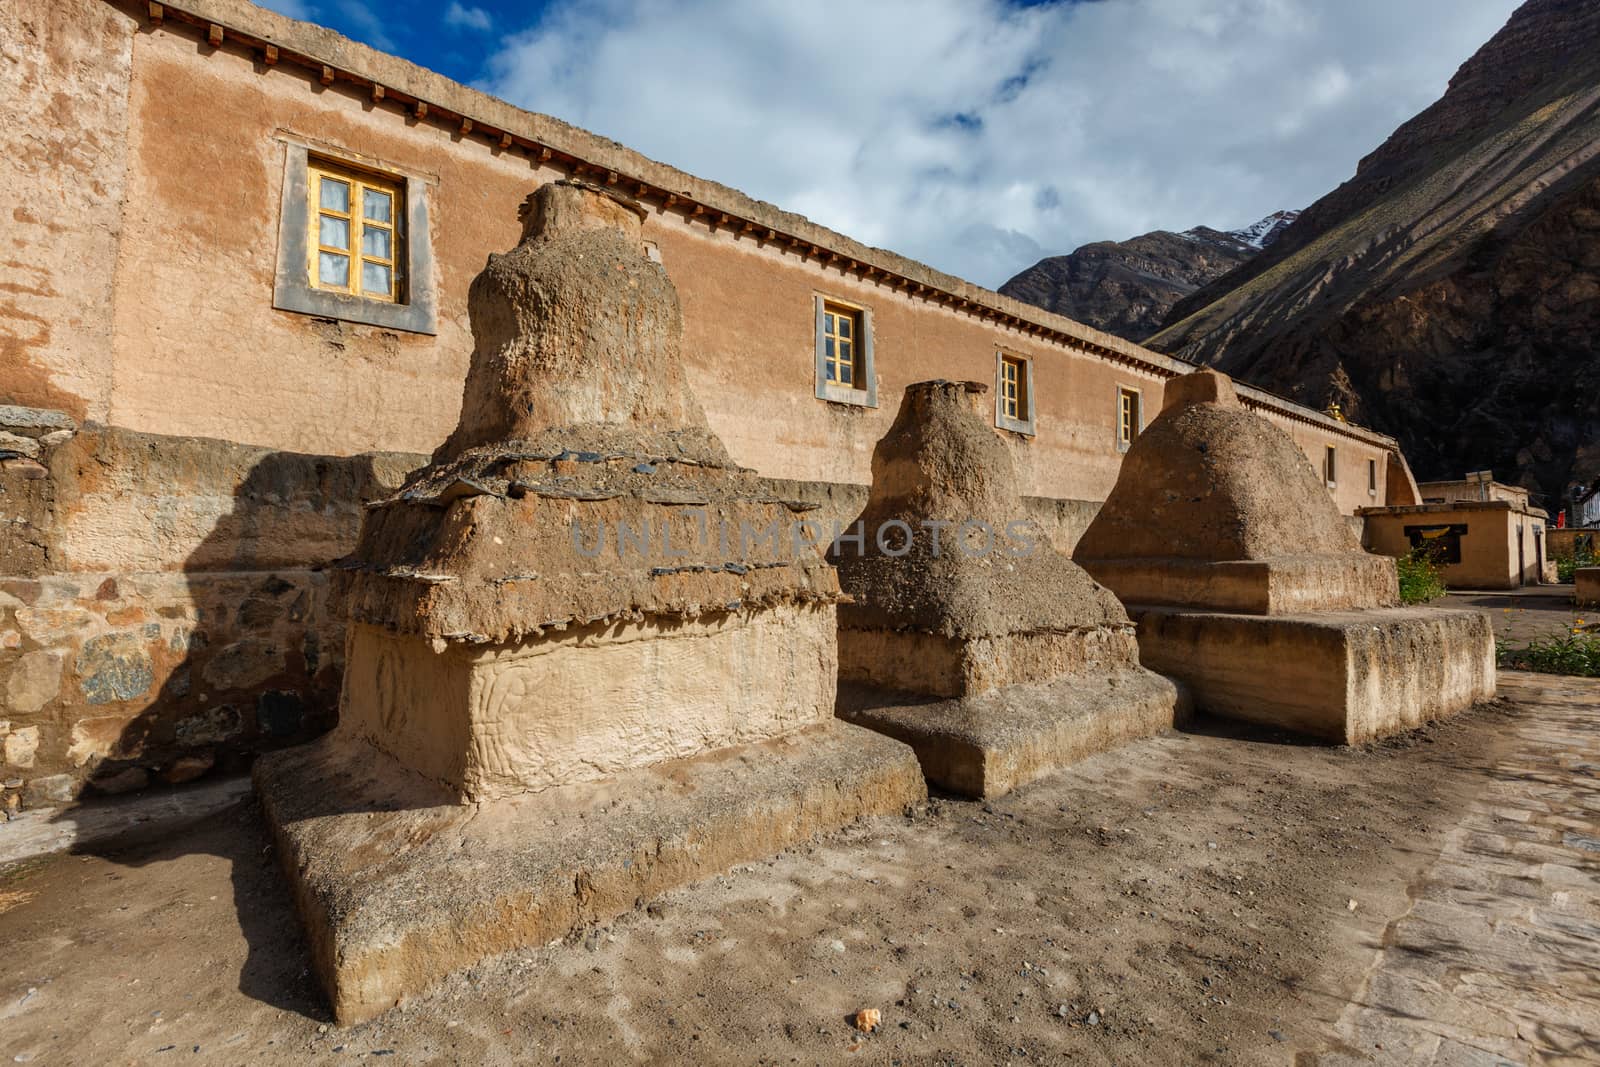 Buddhist Tabo monastery building and gompas made of clay in Tabo village Spiti Valley. Monastery is built on high Himalaya plato in tradition of Tibetan Buddhism religion. Himachal Pradesh, India